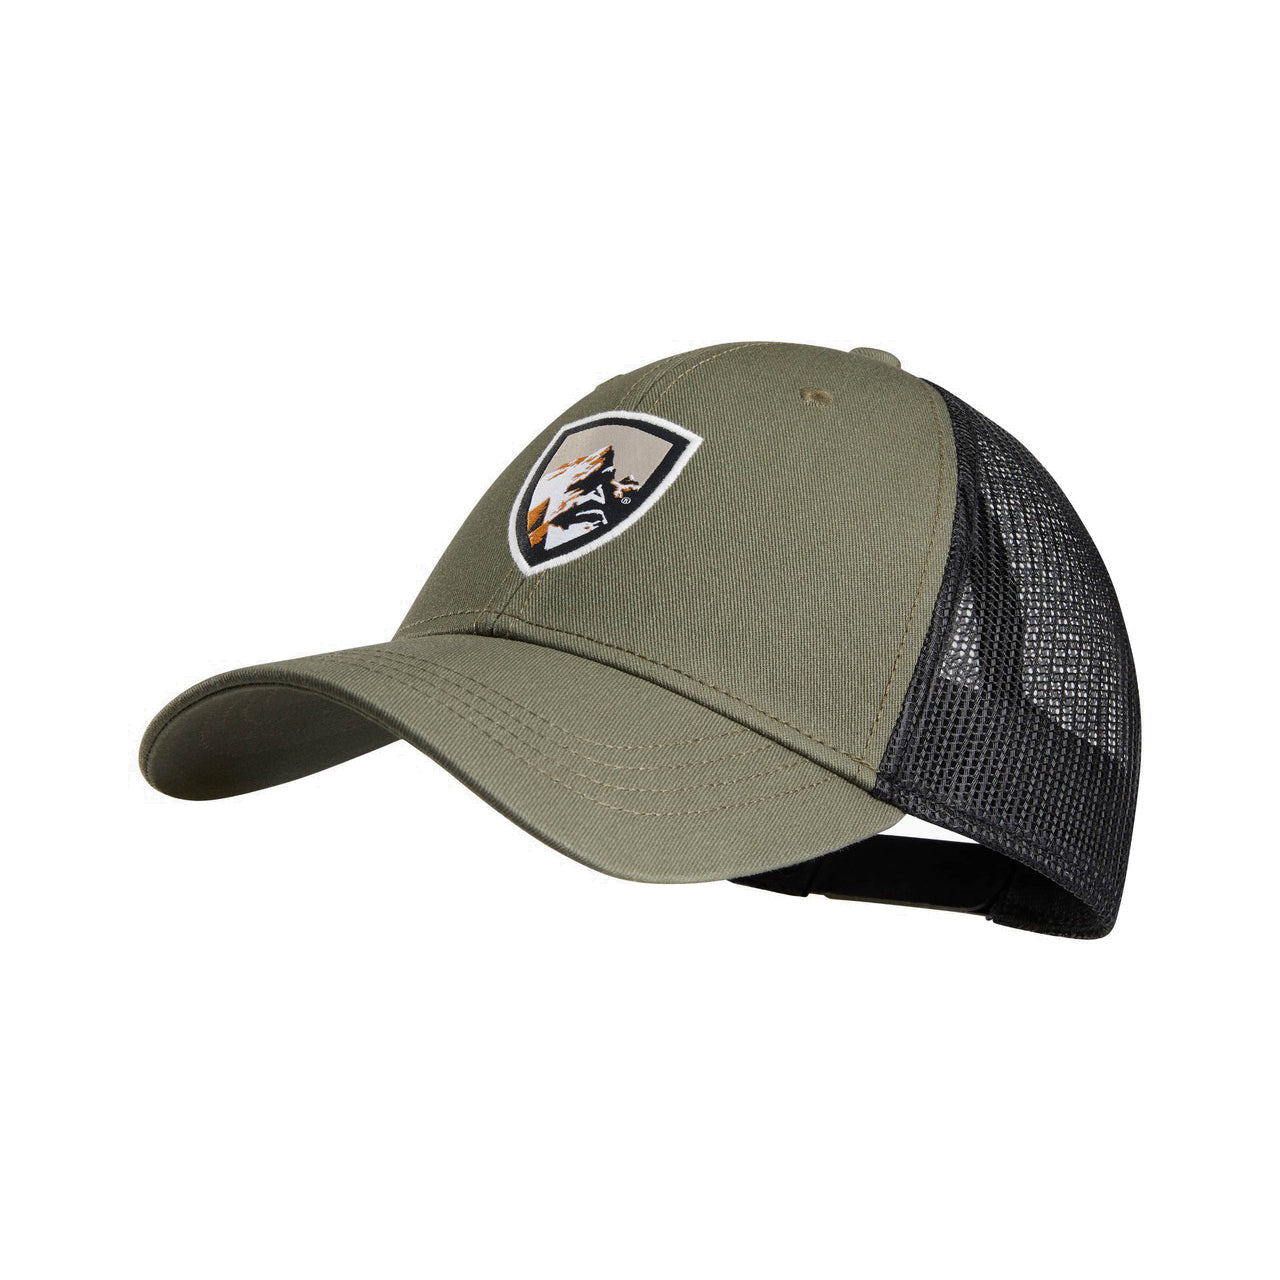 kuhl trucker hat mens three quarter view in color green with kuhl logo and mesh back